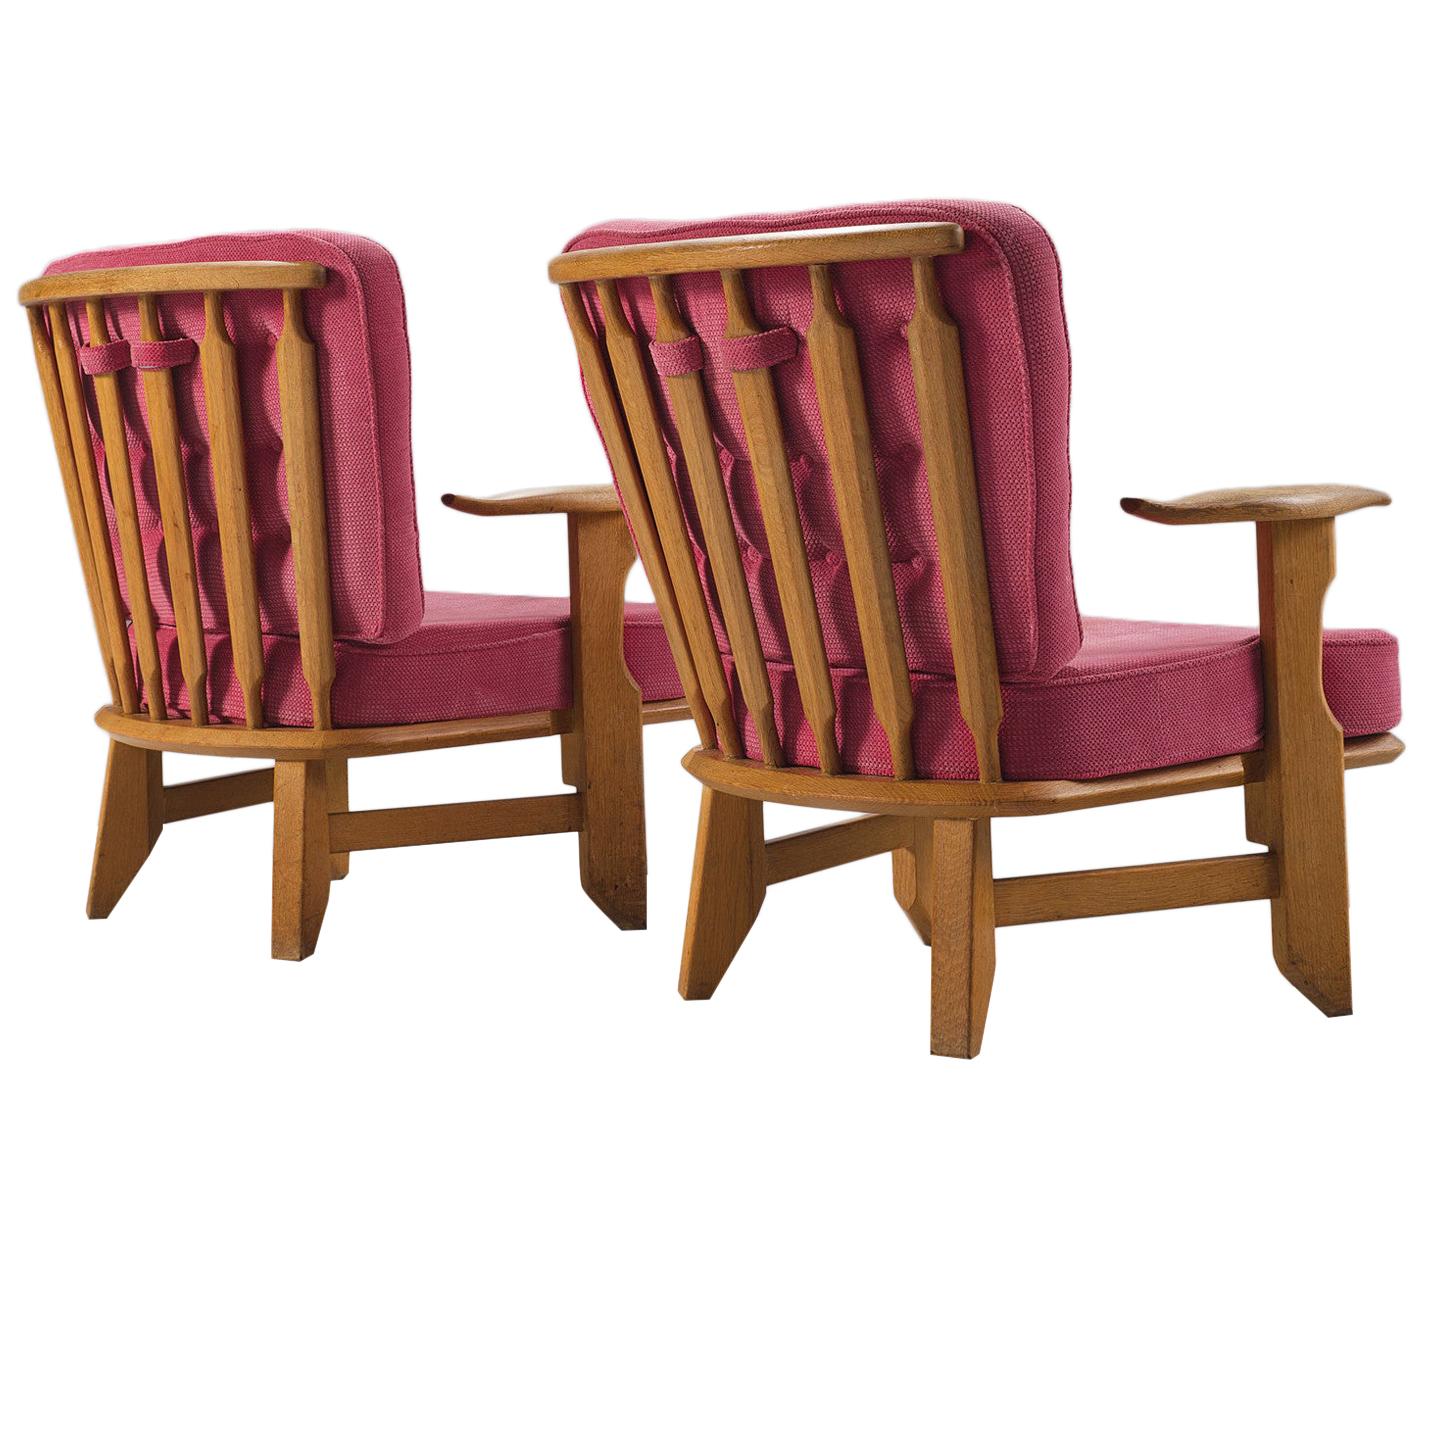 Guillerme & Chambron Pair of Solid Oak Armchairs in Pink Upholstery